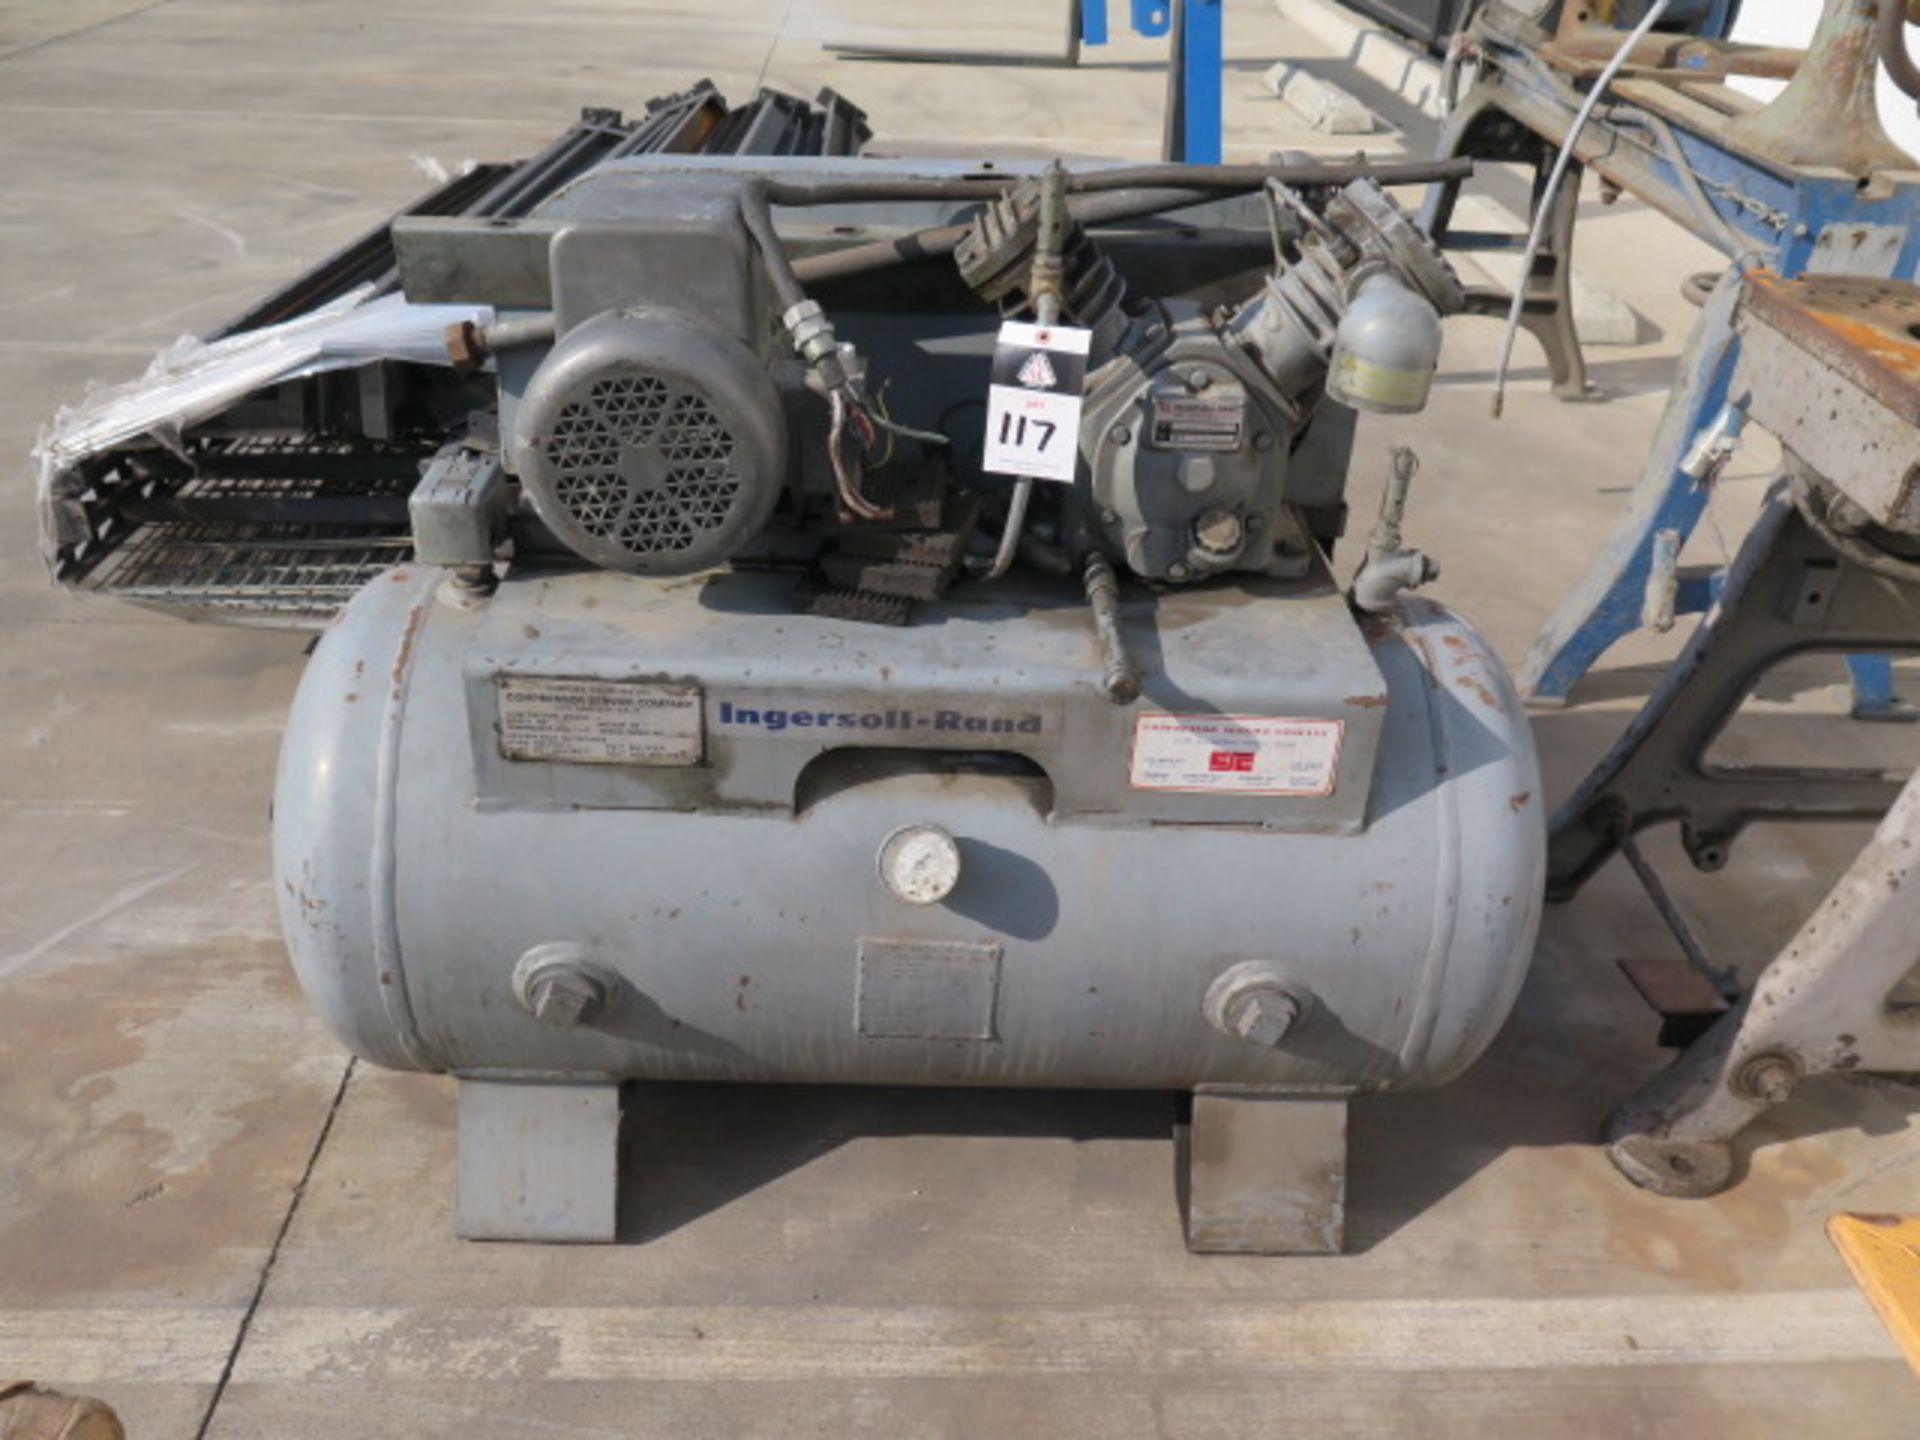 Ingersoll Rand 3Hp Horizontal Air Compressor w/ 2-Stage Pump, 60 Gallon Tank (SOLD AS-IS - NO